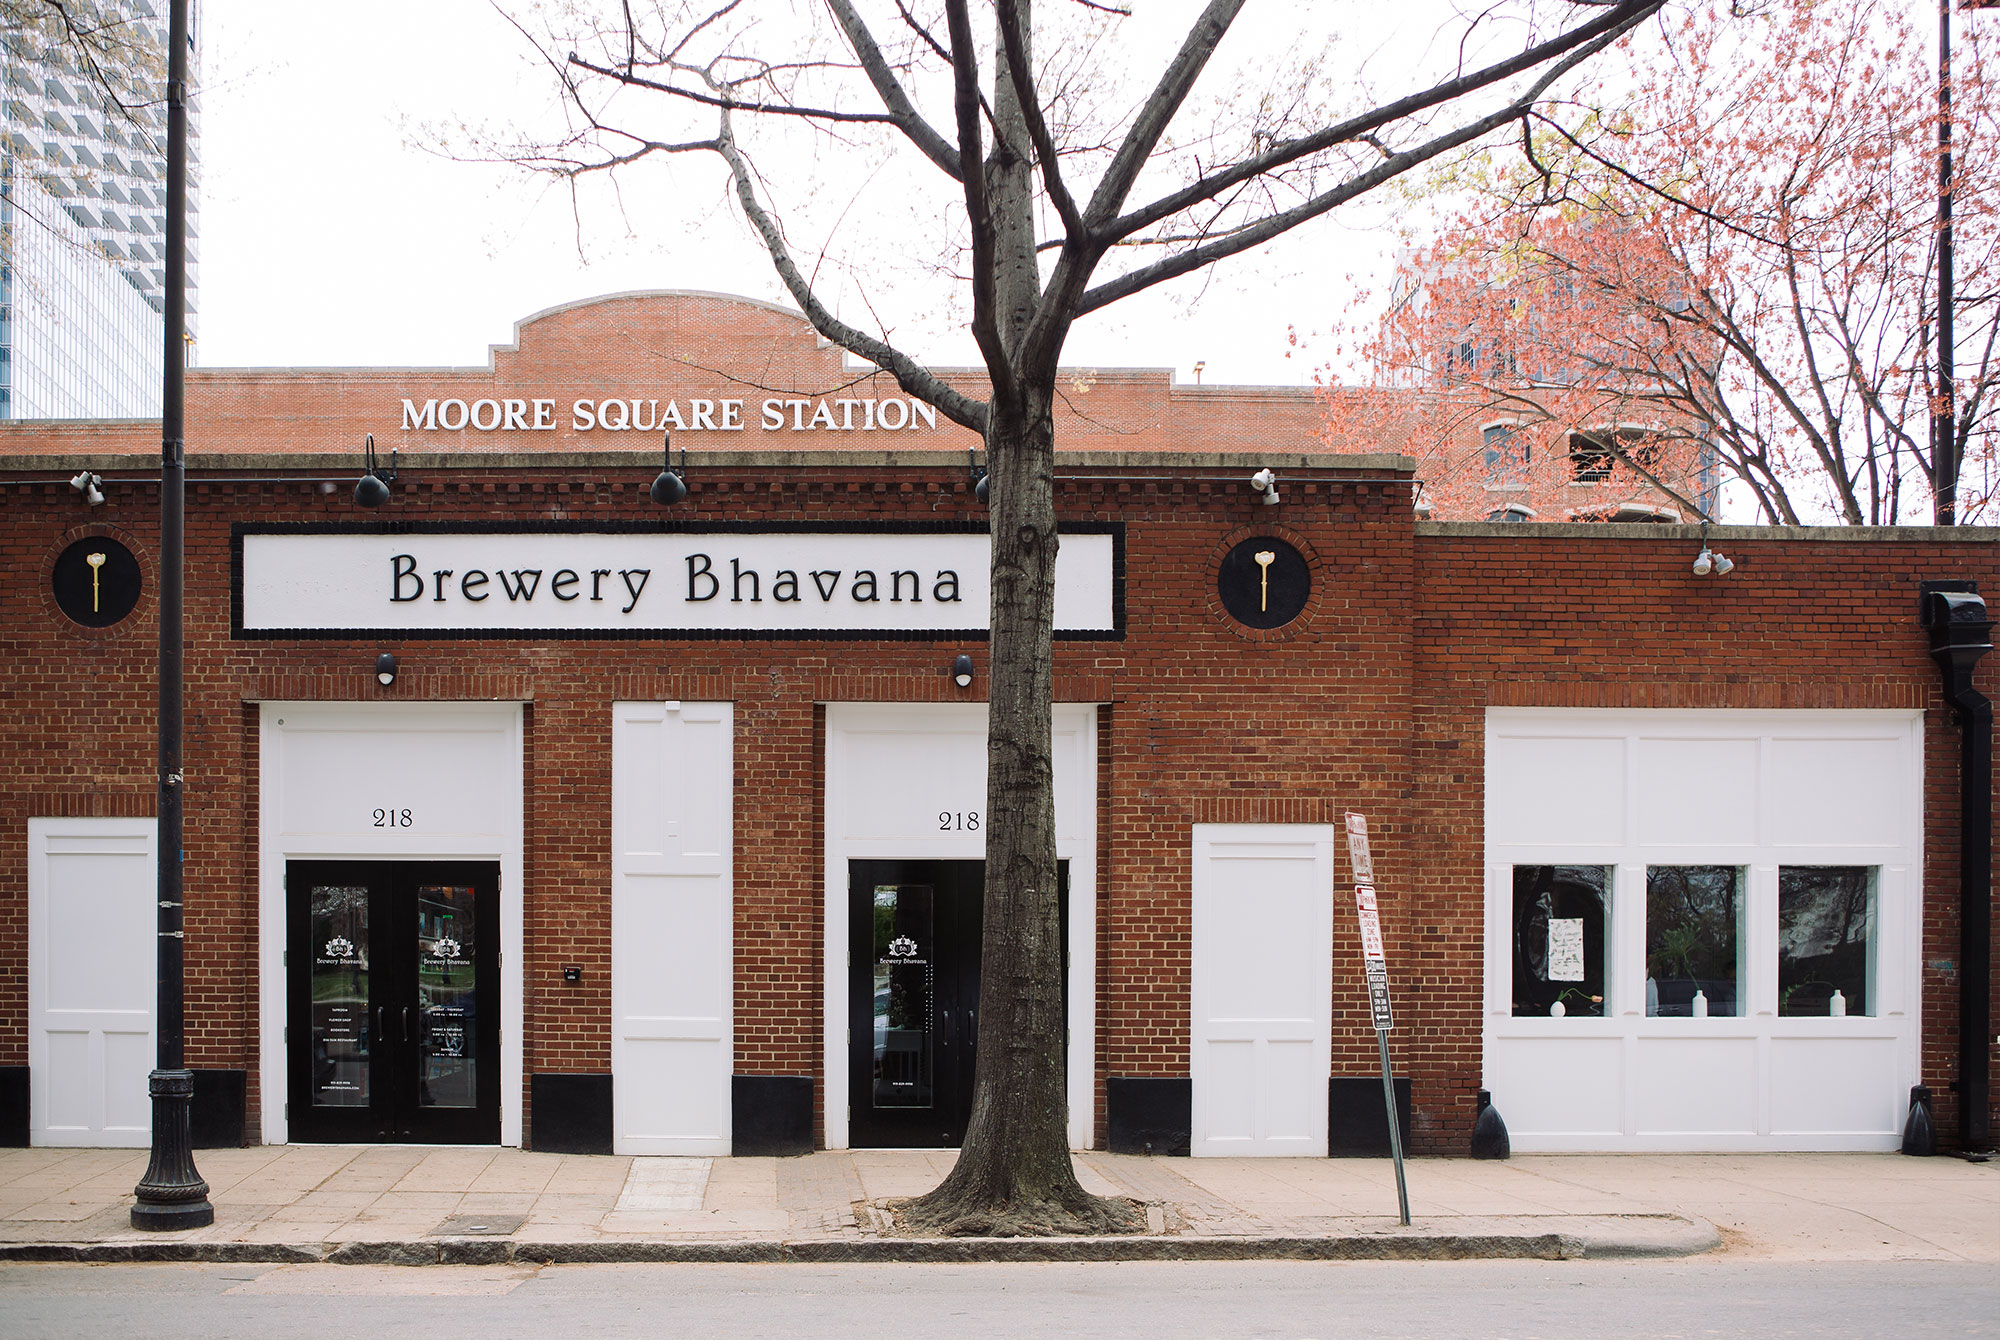 Vansana Nolintha, Co-Founder of Brewery Bhavana, Resigns Amid Accusations of Sexual Assault